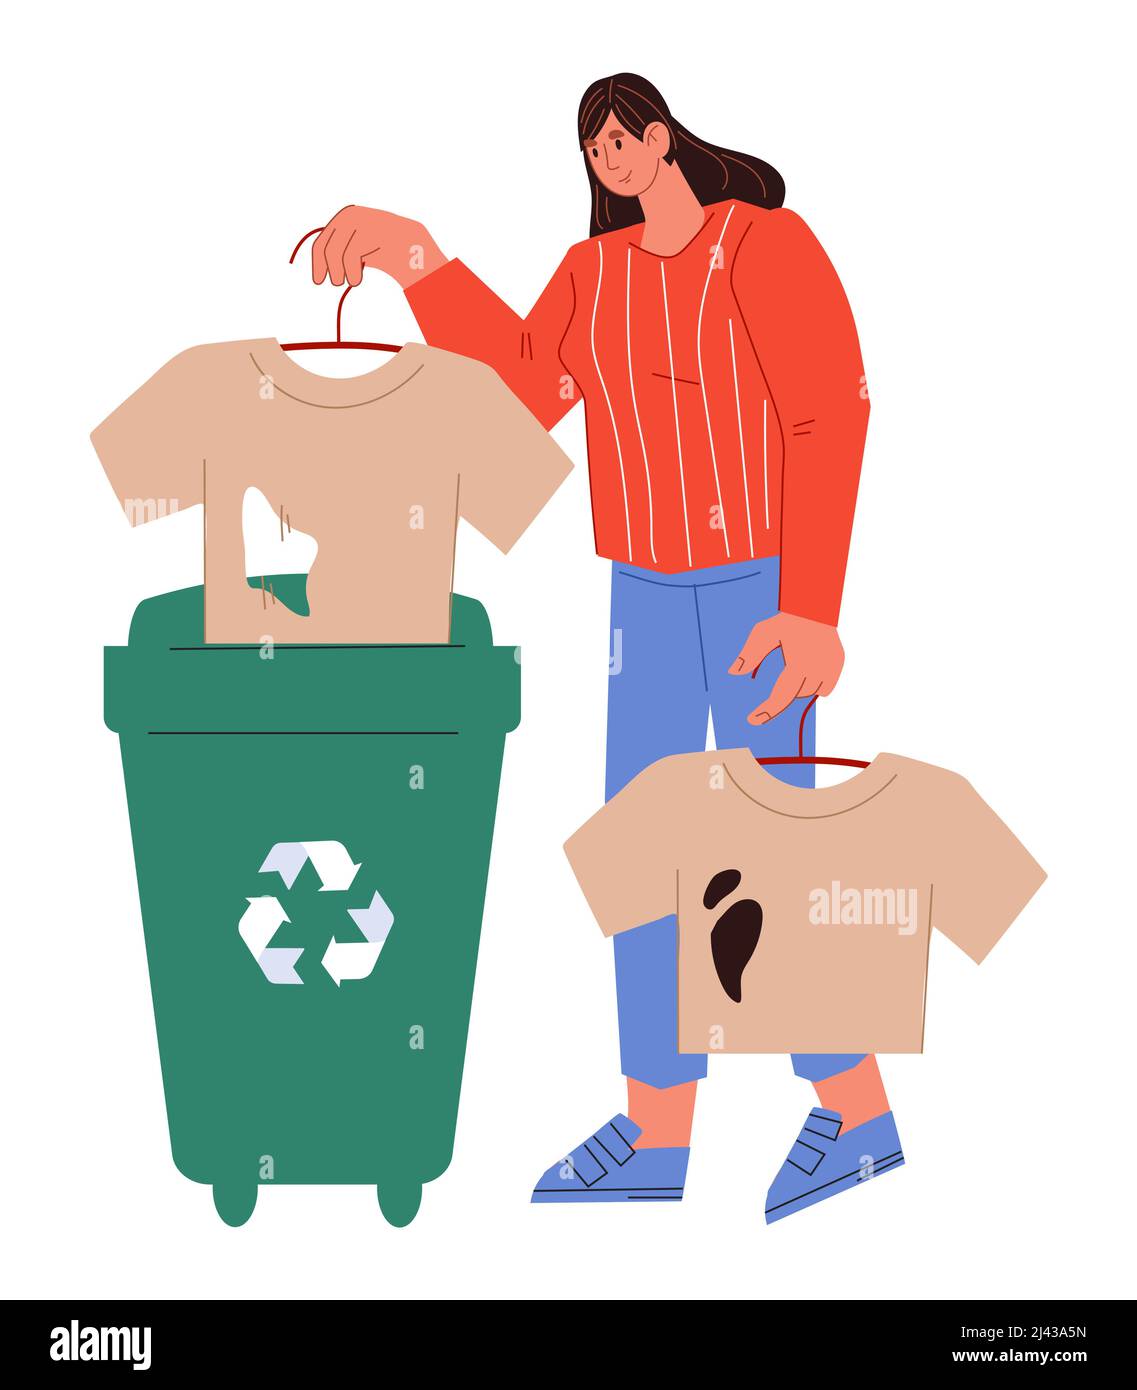 https://c8.alamy.com/comp/2J43A5N/recycling-clothes-and-textile-eco-conceptwoman-brings-used-clothes-for-recycle-eco-friendly-reusable-fabric-production-flat-vector-illustration-iso-2J43A5N.jpg